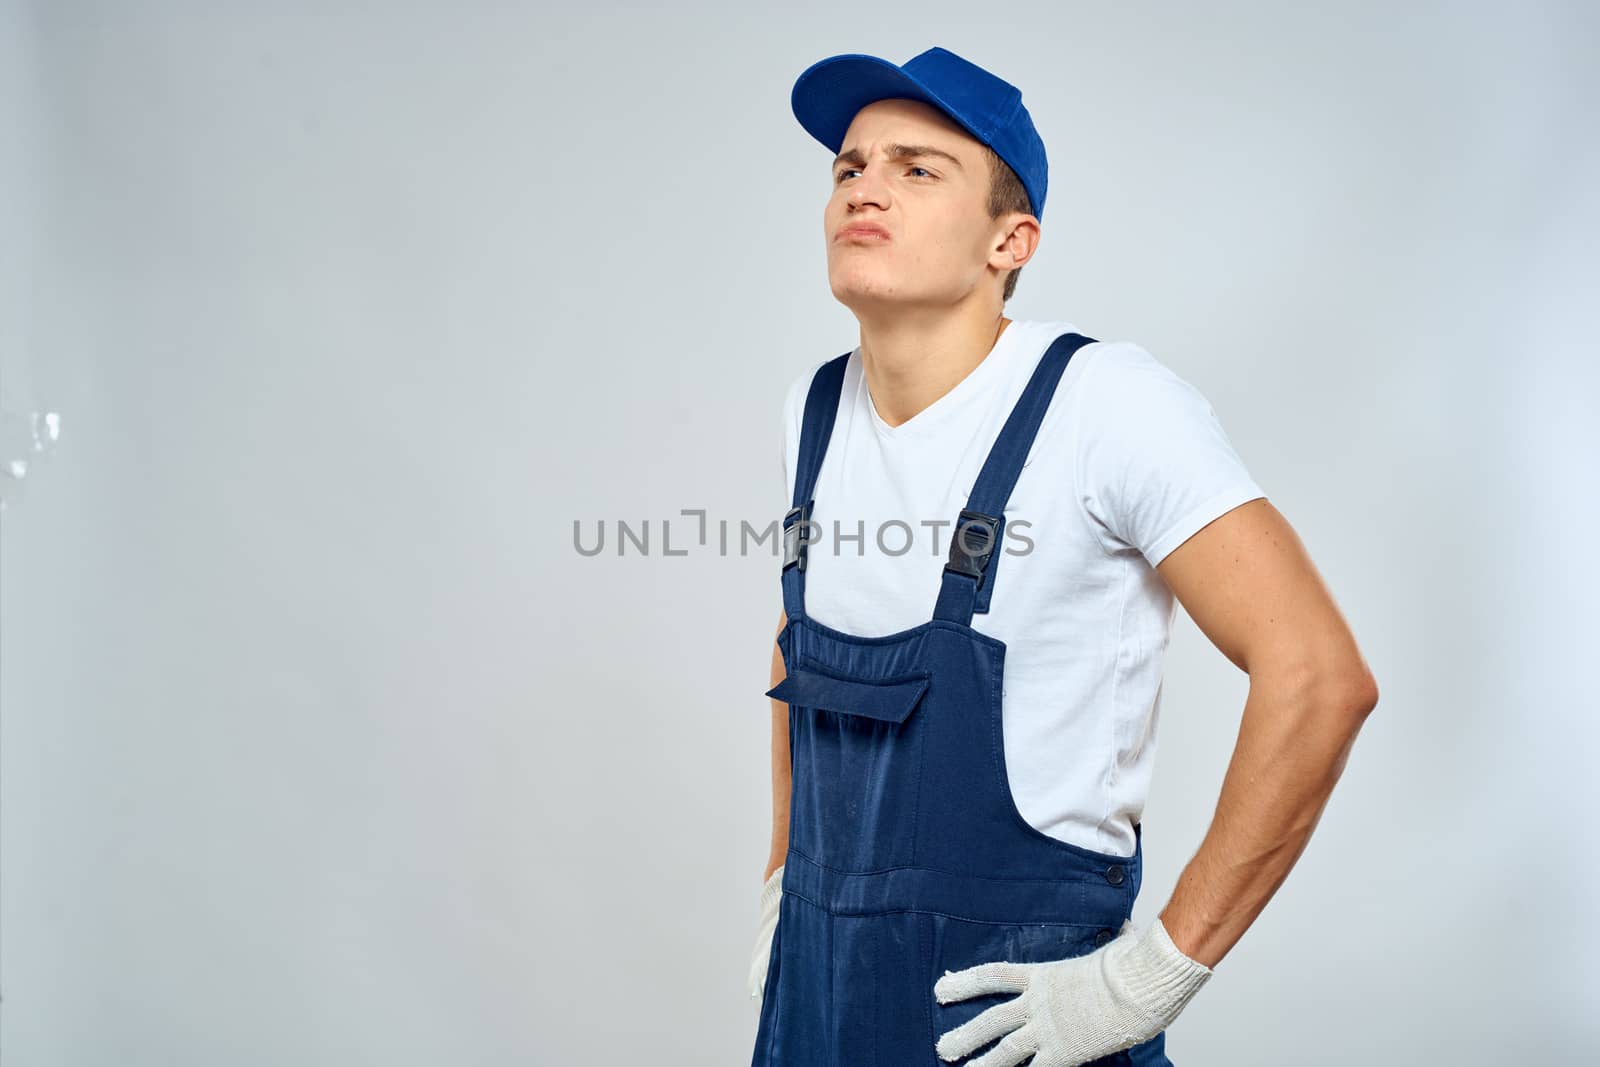 Man worker in forklift uniform delivery service light background. High quality photo